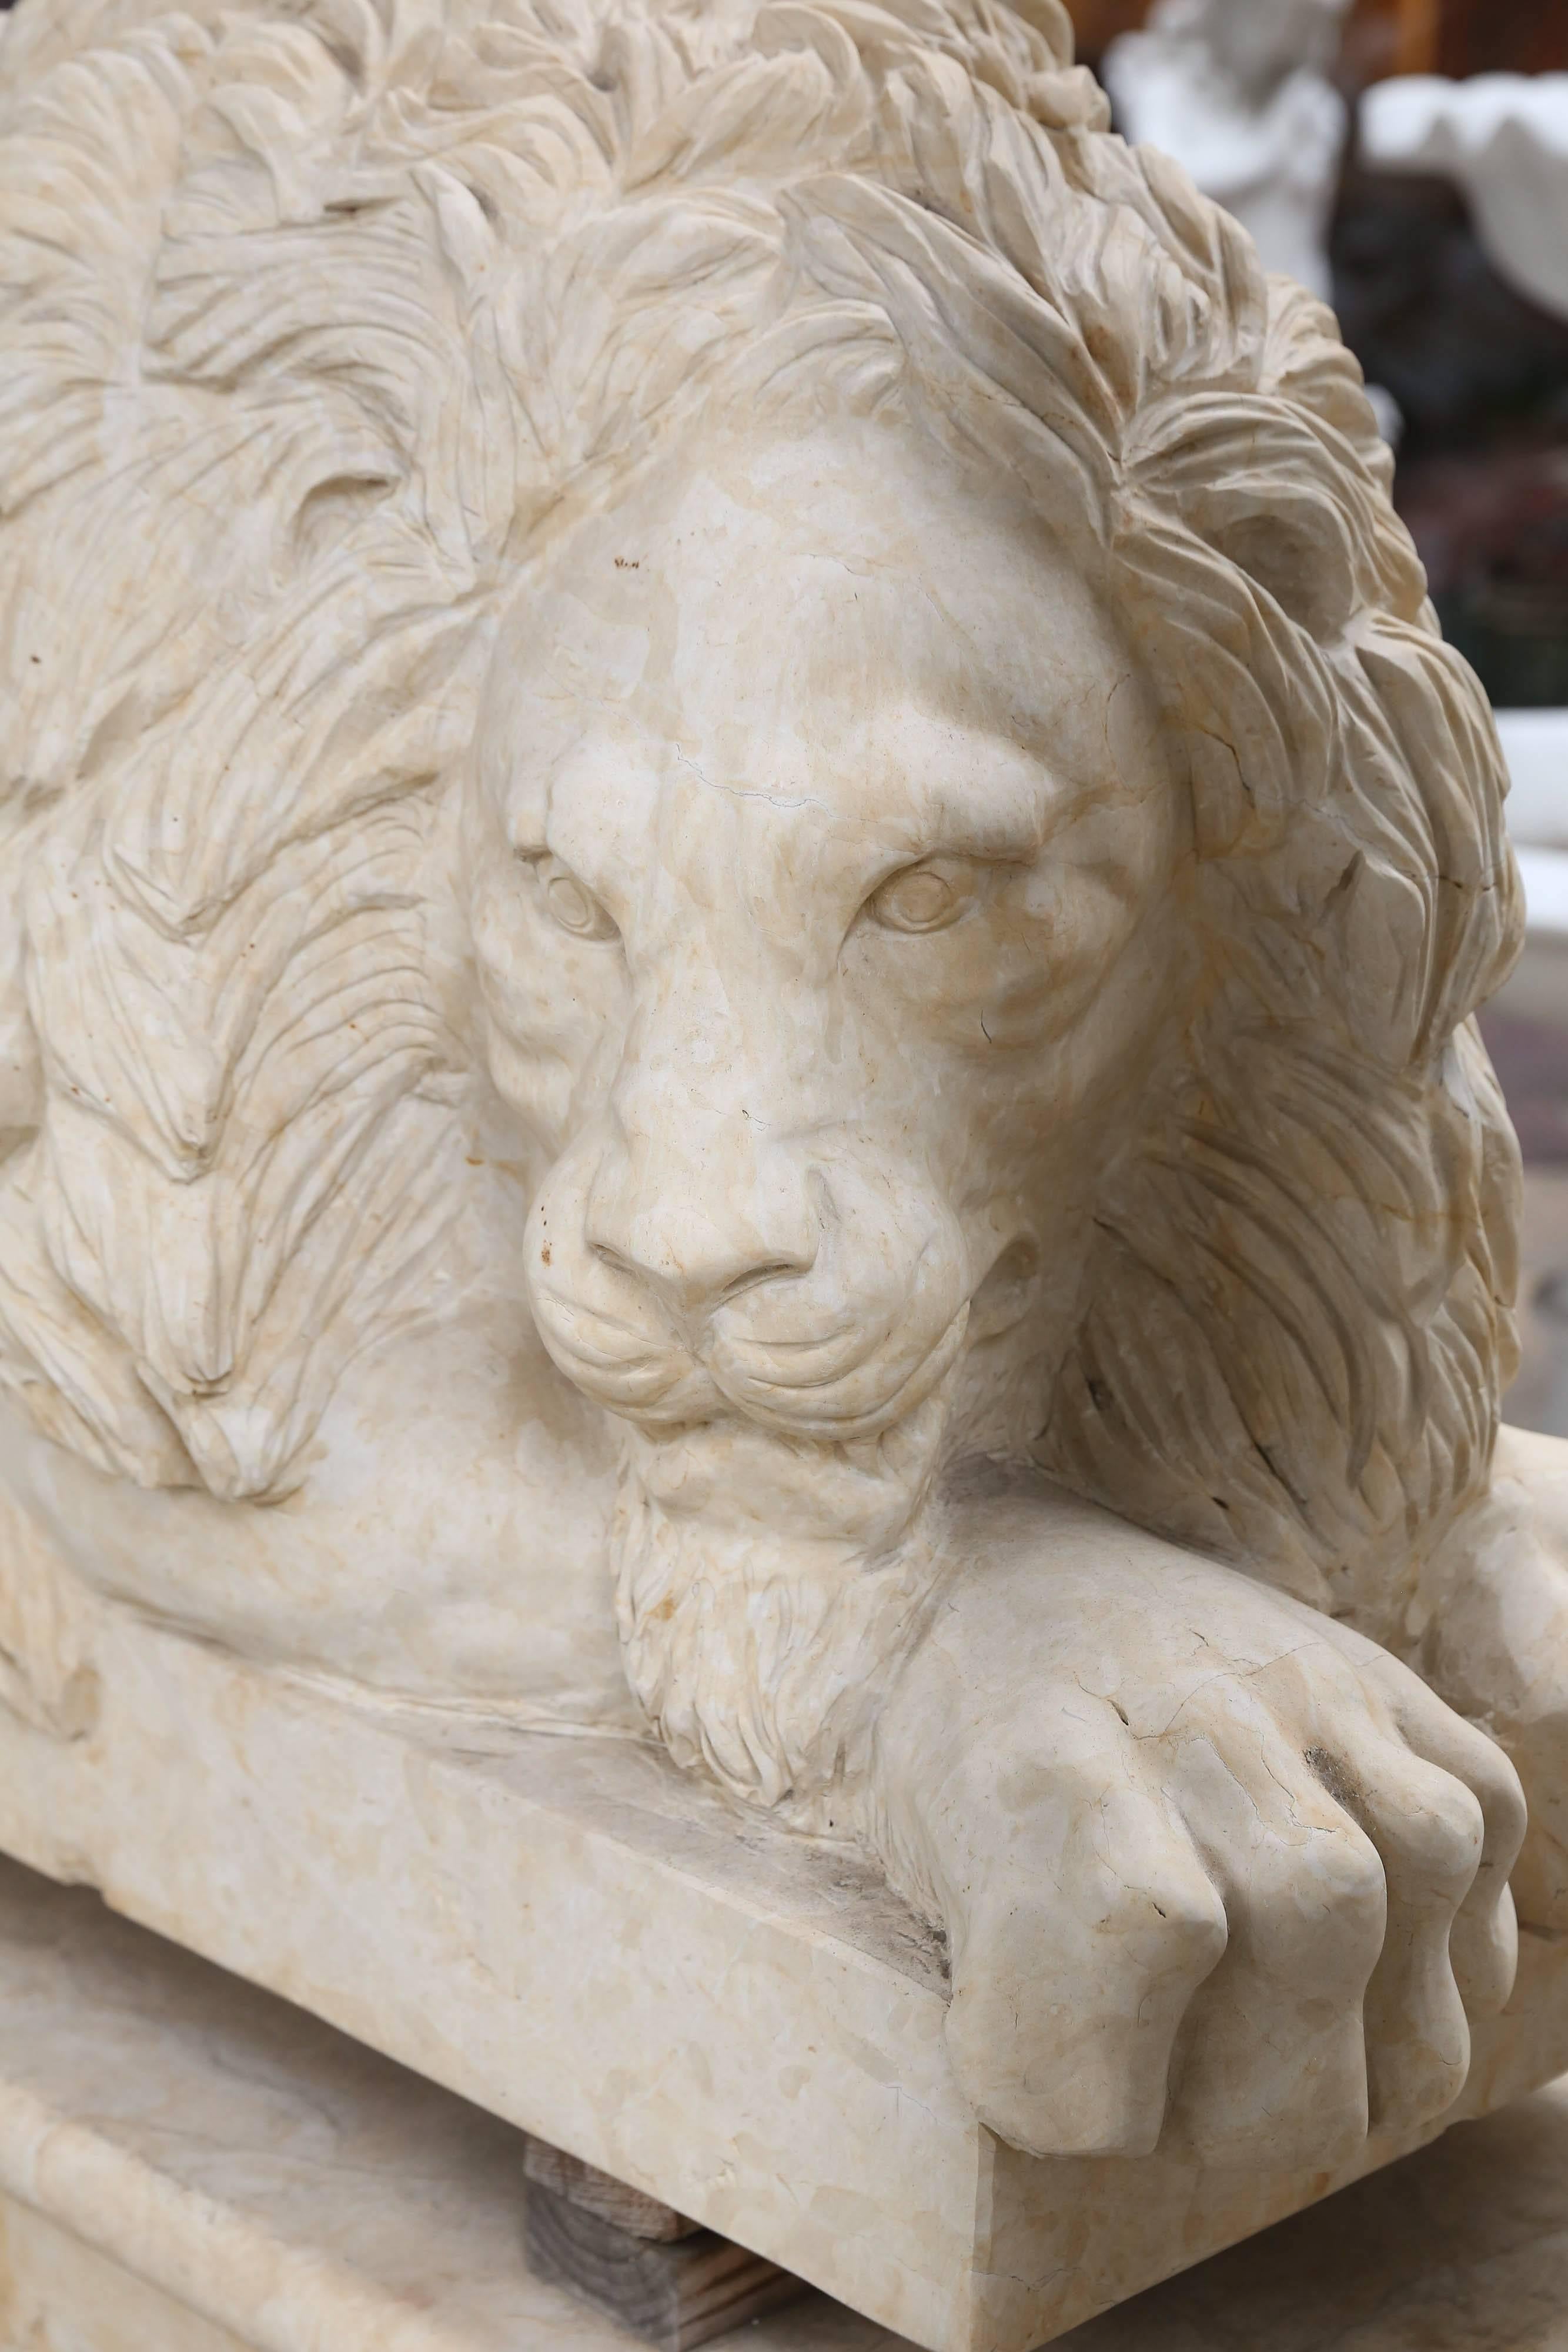 Chinese Pair of Large and Impressive Carved Marble Lion Garden Statues on Pedestals